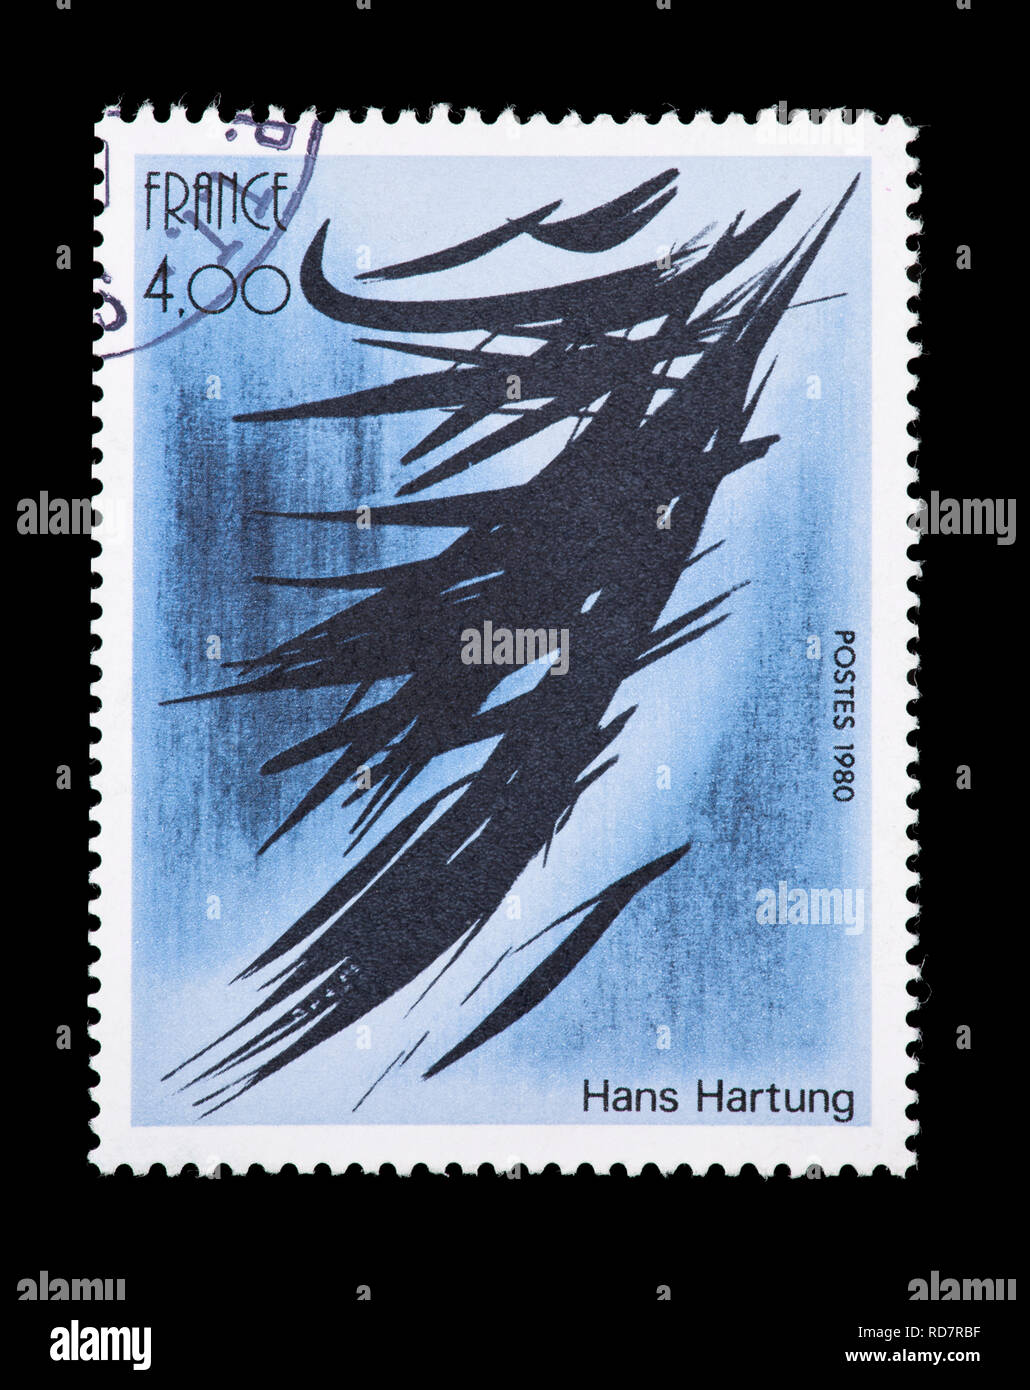 Postage stamp from France depicting the Hans Hartung painting 'Abstract' Stock Photo